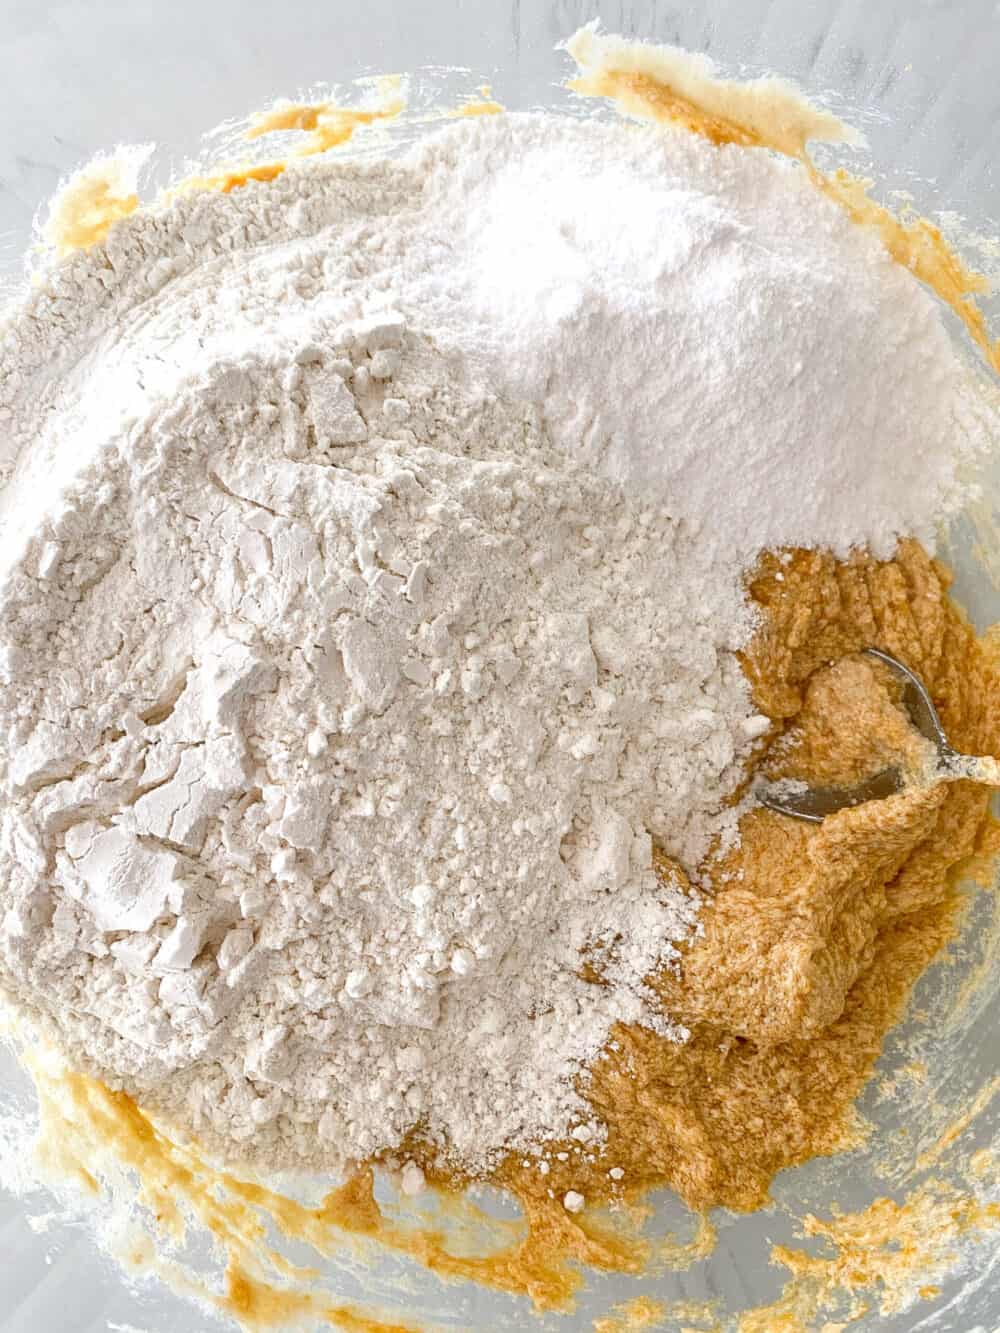 dry ingredients added to mixing bowl